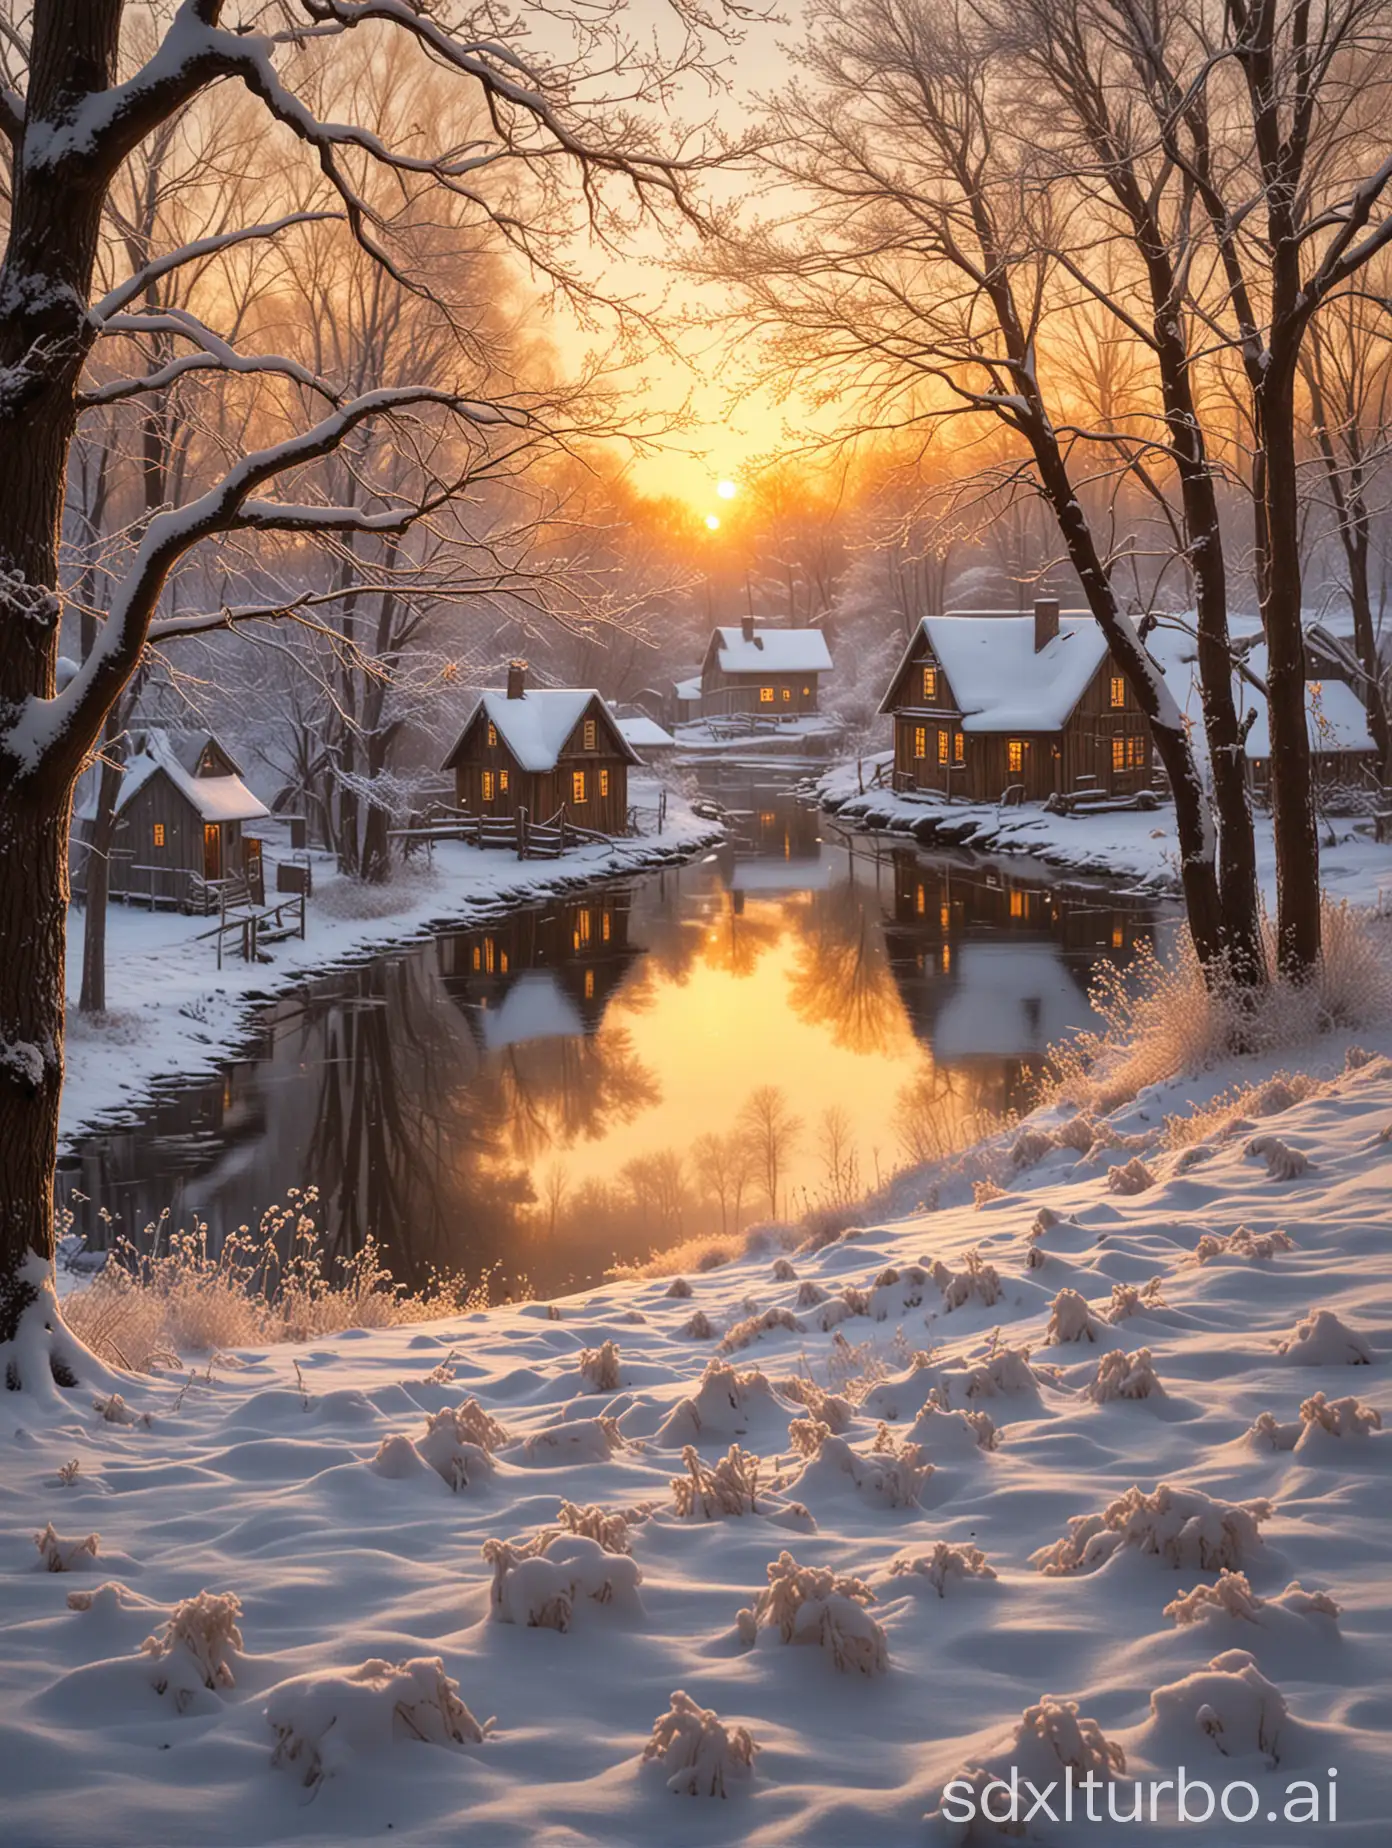 Chilly-Evening-Snowscape-Golden-Sunset-Romance-in-Nostalgic-Ambiance